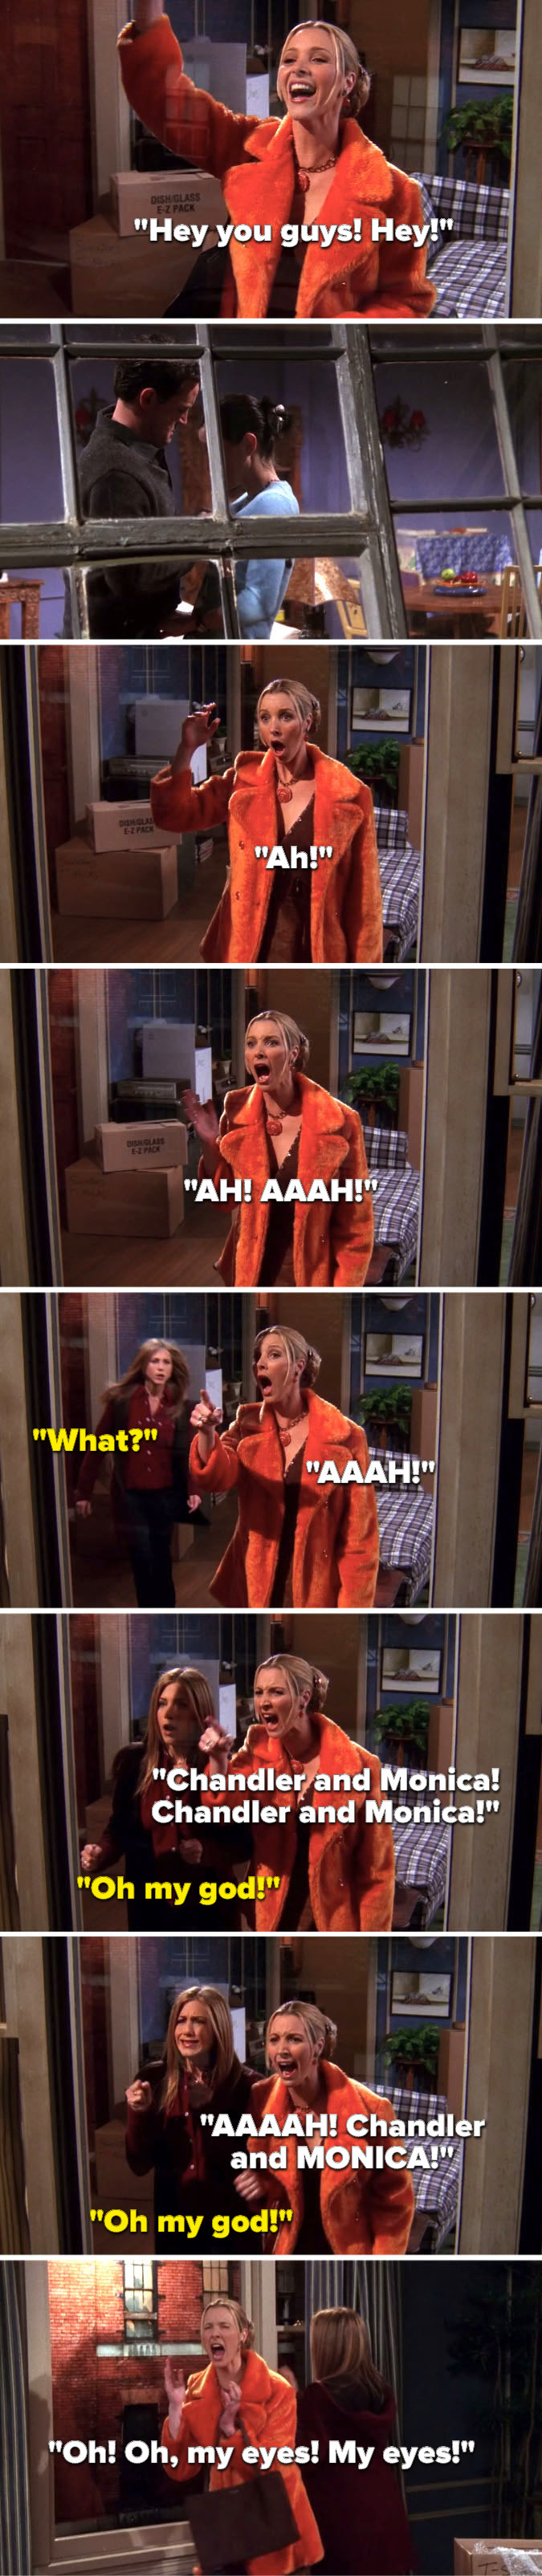 Phoebe sees Monica and Chandler in the window and says, &quot;Hey you guys,&quot; they start hooking up and Phoebe screams, Rachel asks, &#x27;What,&quot; Phoebe says, &quot;Chandler and Monica, Chandler and MONICA,&quot; Rachel says, &quot;Oh my god,&quot; and Phoebe says, &quot;My eyes, my eyes&quot;